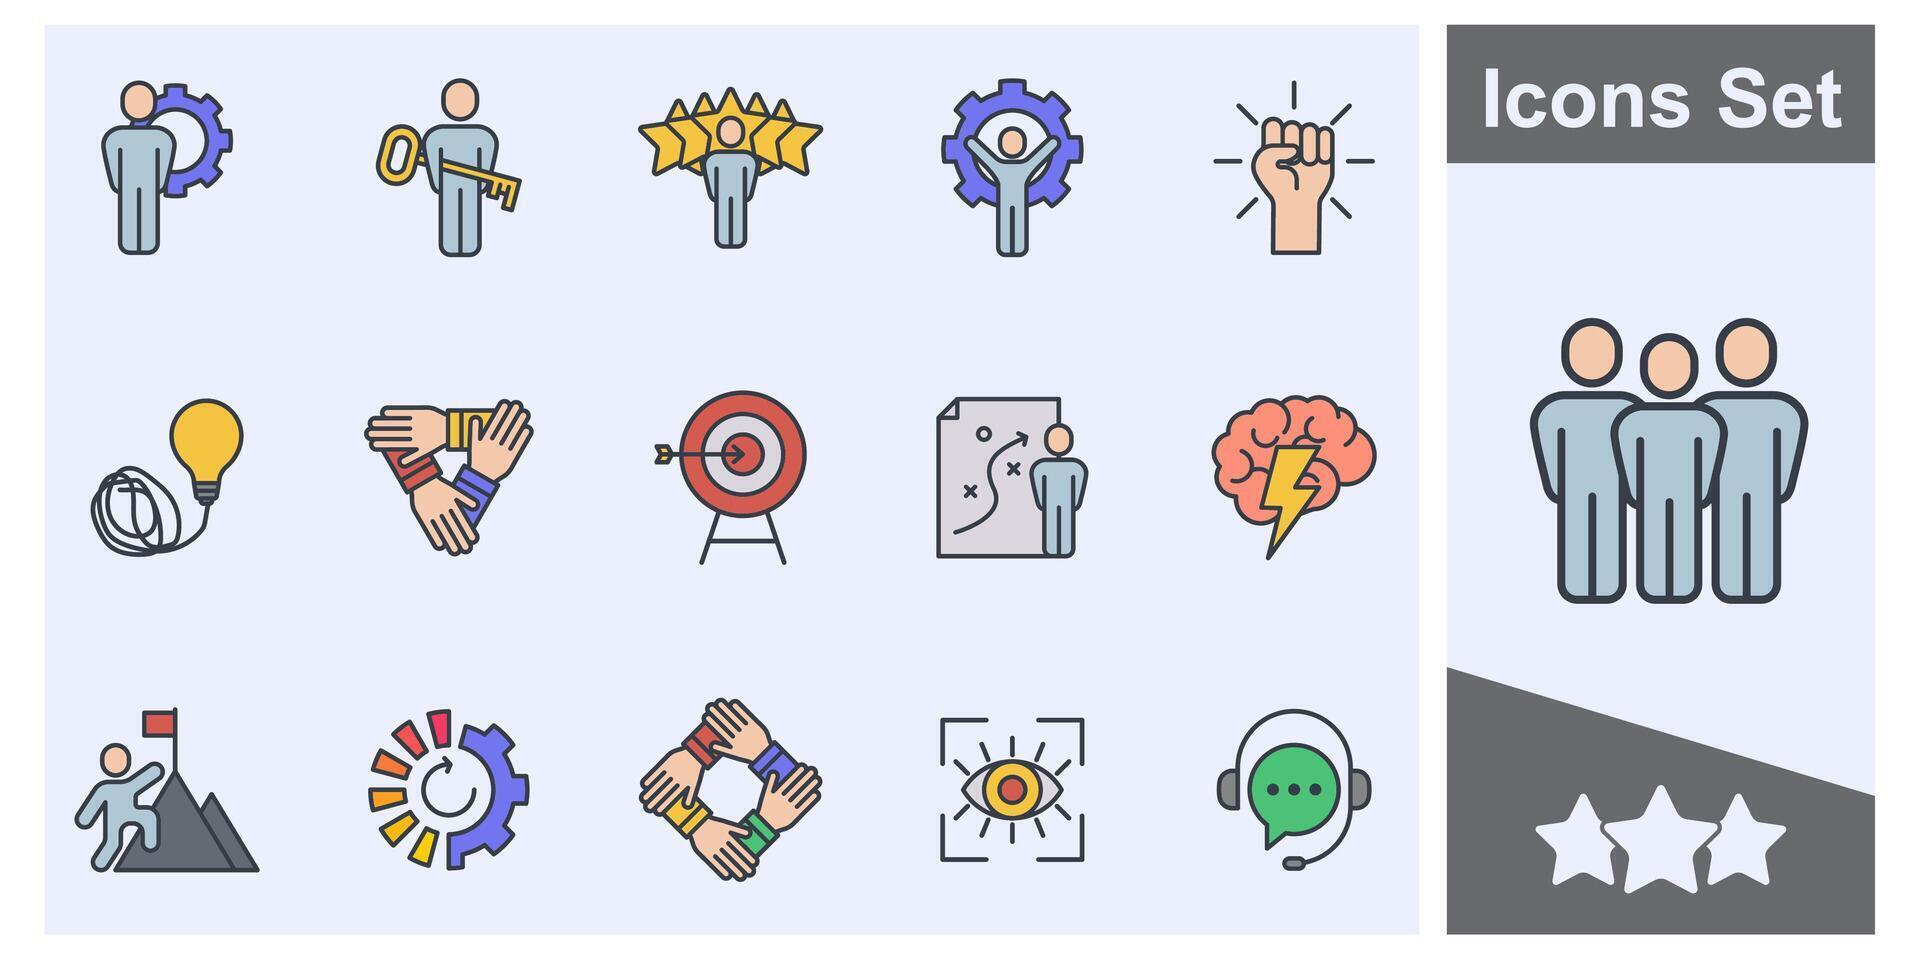 Teamwork in business management icon set symbol collection, logo isolated illustration vector